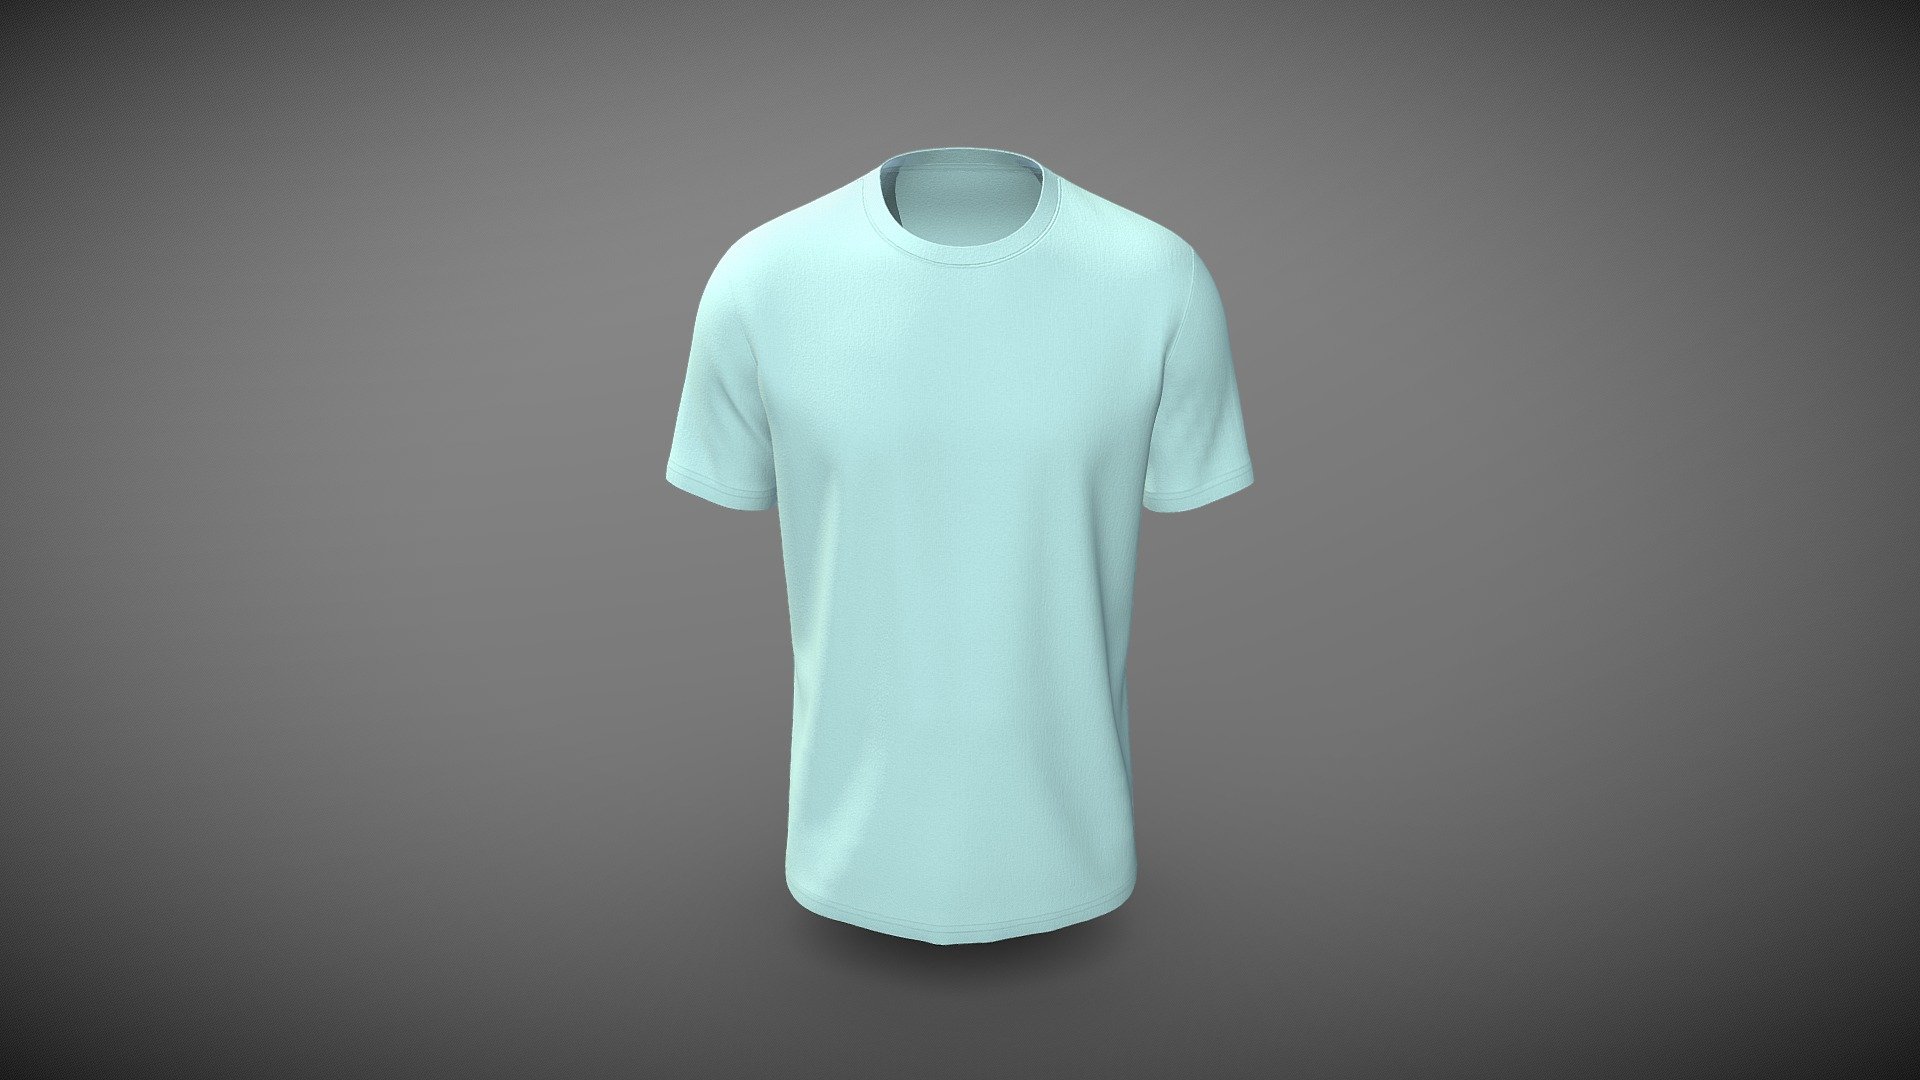 Cloth Title = Men's Loose-Fit Short-Sleeve Round Neck T-Shirt (Low Poly)
SKU = DG100044 
Category = Unisex 
Product Type = T-Shirt 
Cloth Length = Regular 
Body Fit = Loose Fit 
Occasion = Casual  
Sleeve Style = Set In Sleeve

Our Services:

3D Apparel Design.

OBJ,FBX,GLTF Making with High/Low Poly.

Fabric Digitalization.

Mockup making.

3D Teck Pack.

Pattern Making.

2D Illustration.

Cloth Animation and 360 Spin Video.


Contact us:- 

Email: info@digitalfashionwear.com 

Website: https://digitalfashionwear.com 


We designed all the types of cloth specially focused on product visualization, e-commerce, fitting, and production. 

We will design: 

T-shirts 

Polo shirts 

Hoodies 

Sweatshirt 

Jackets 

Shirts 

TankTops 

Trousers 

Bras 

Underwear 

Blazer 

Aprons 

Leggings 

and All Fashion items. 





Our goal is to make sure what we provide you, meets your demand 3d model